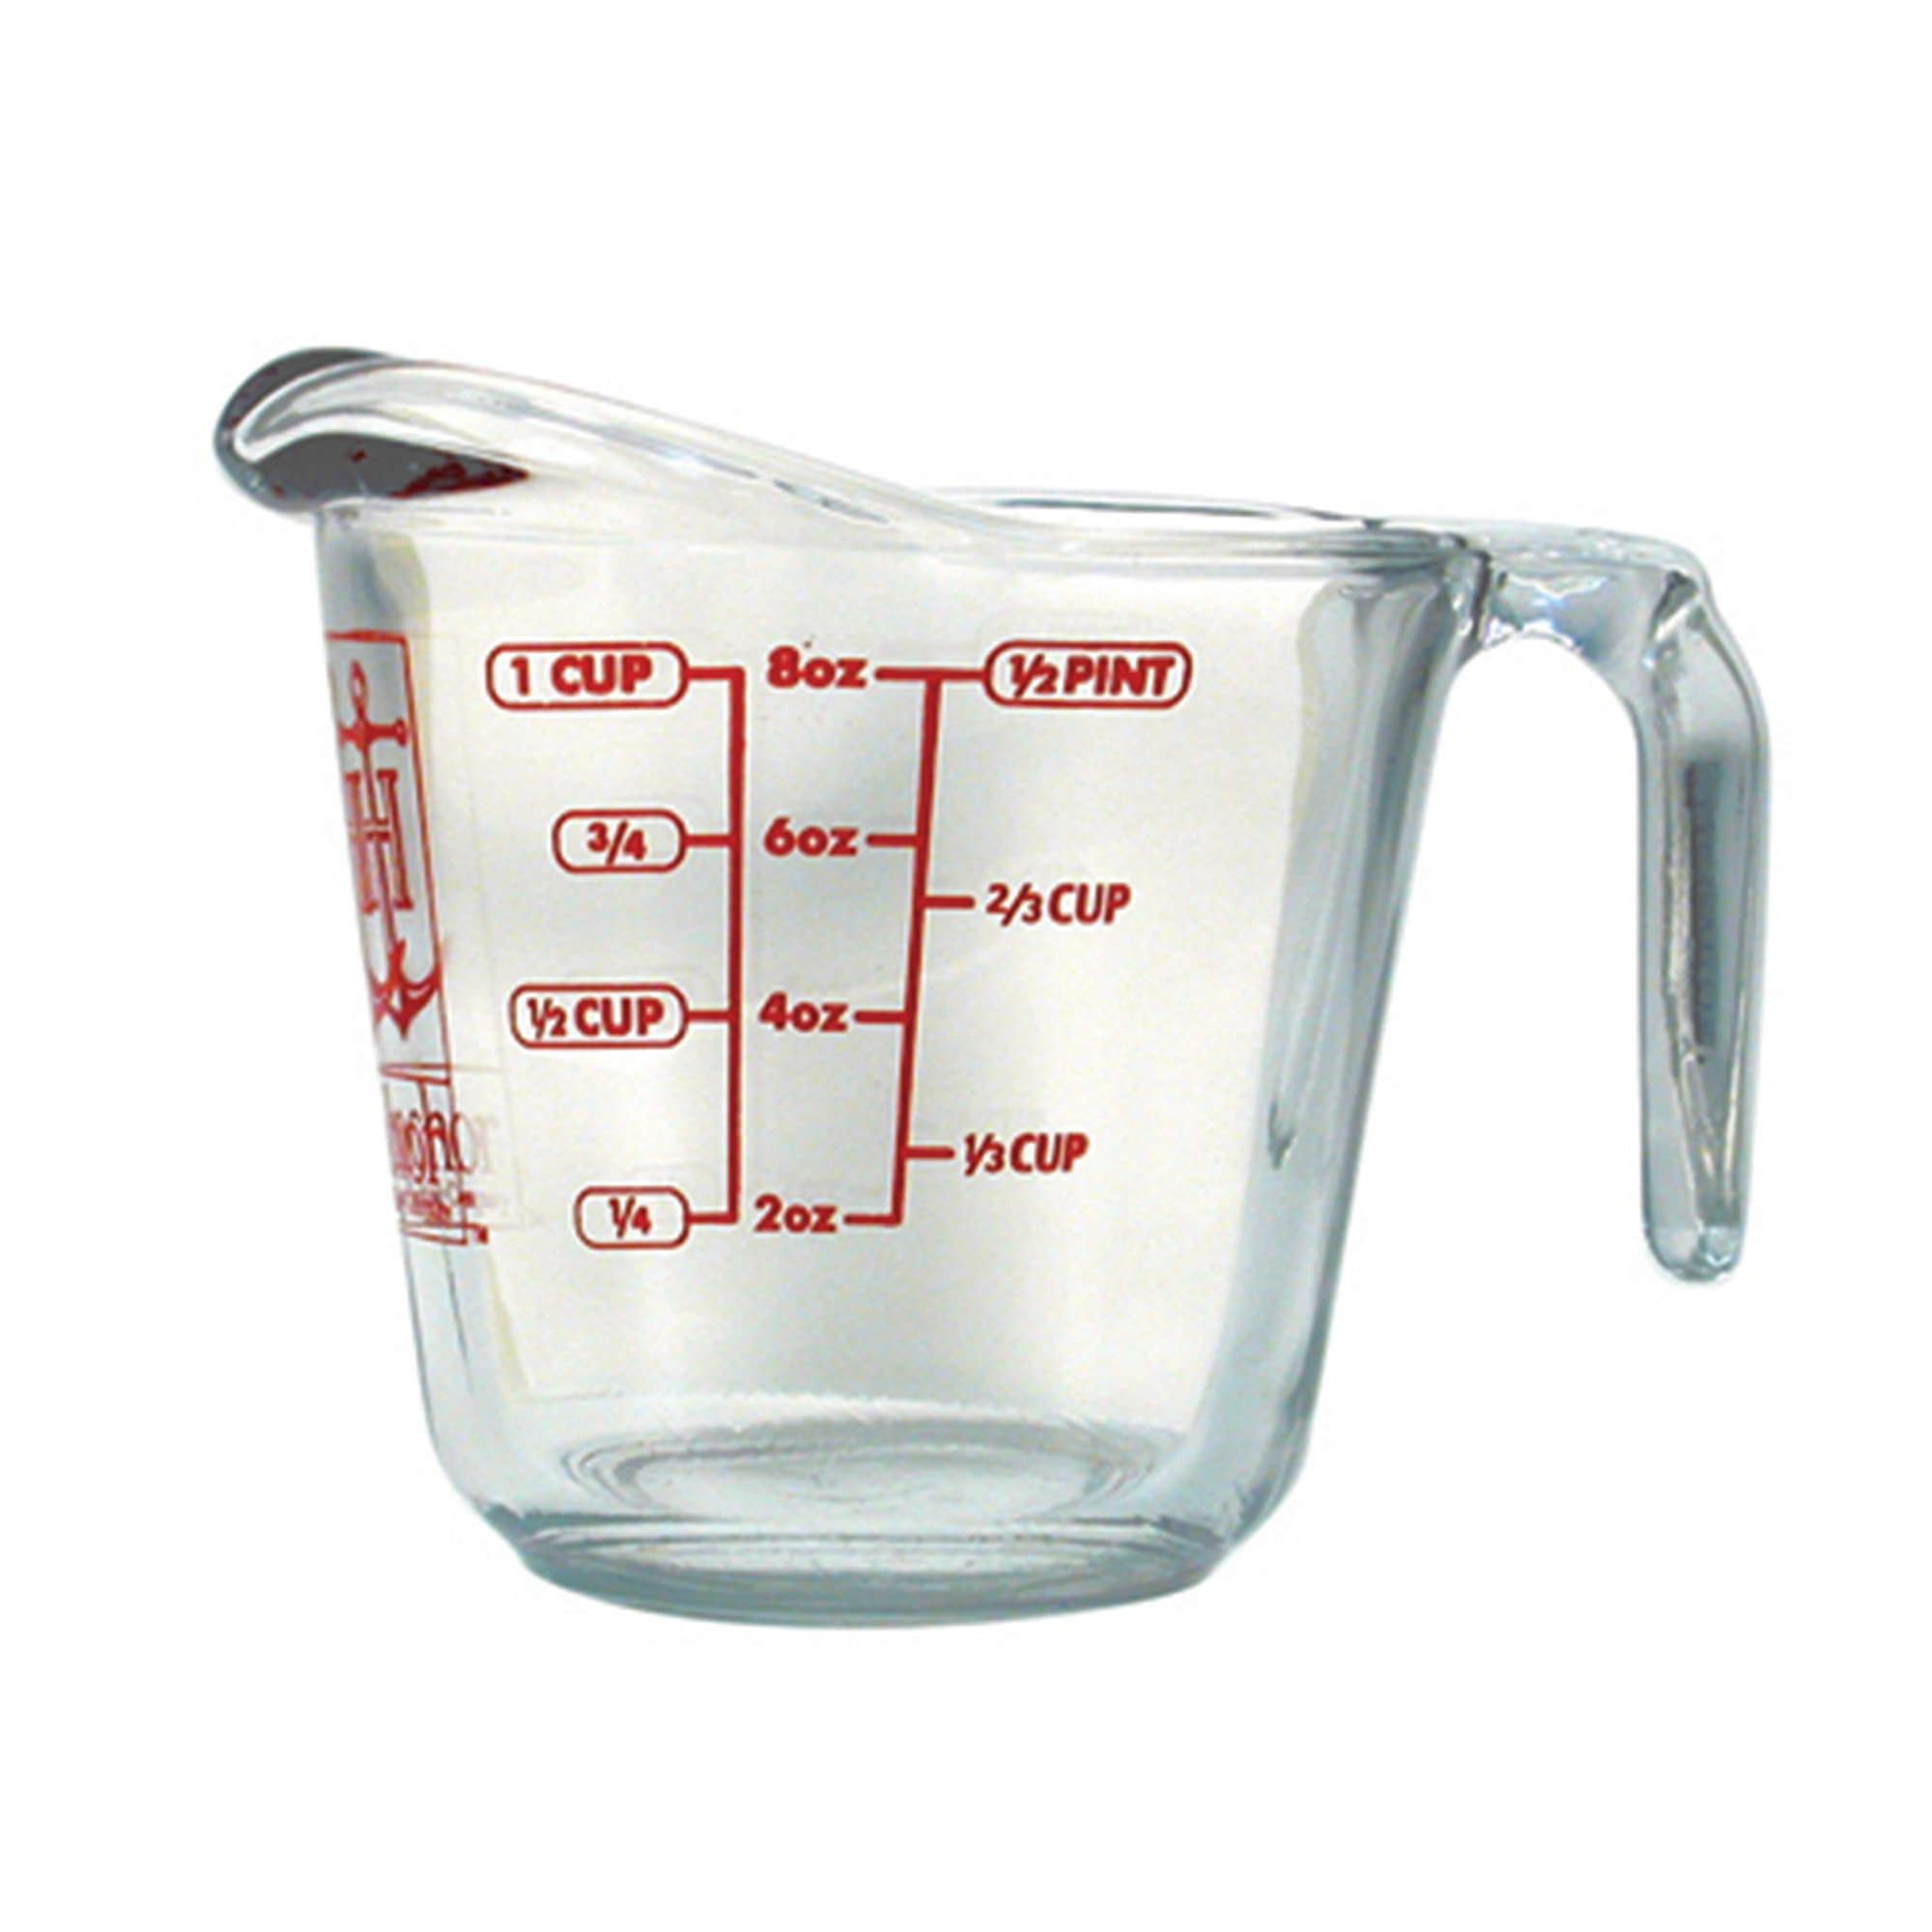 Pyrex Glass Measuring Cup 517 